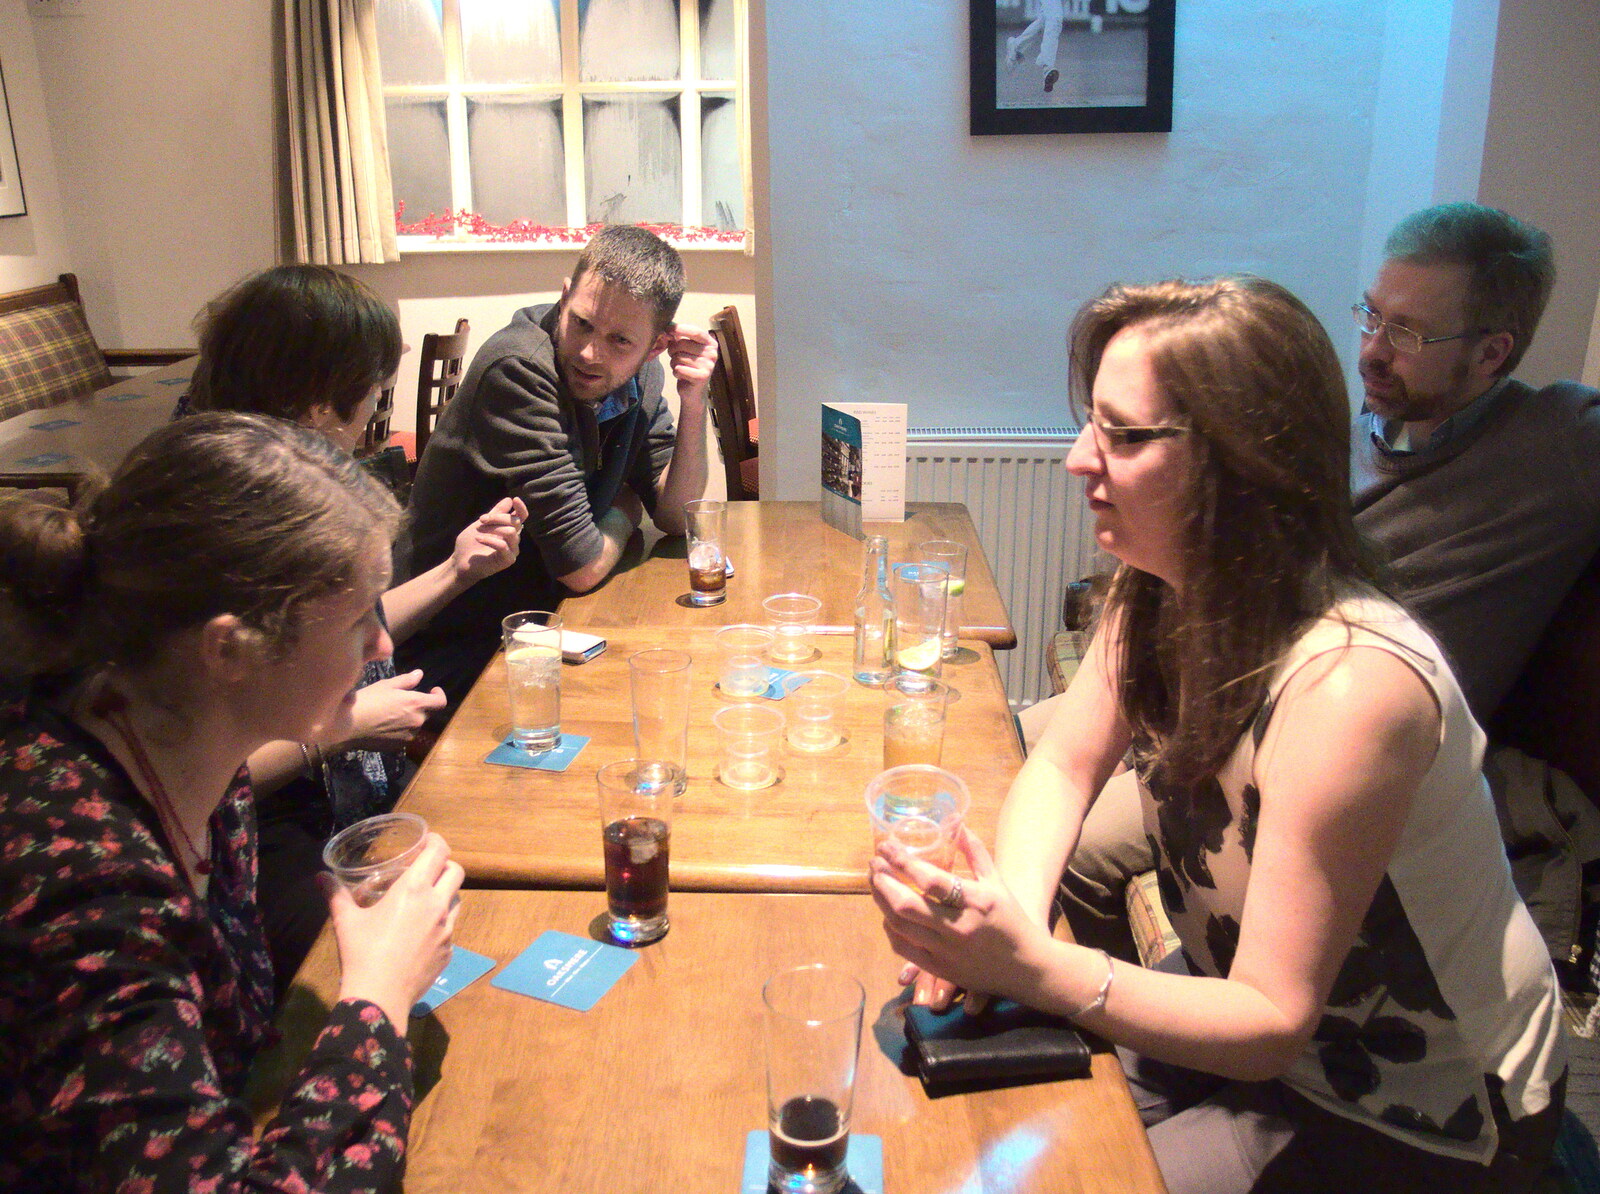 Late night conversation from New Year's Eve at the Oaksmere, Brome, Suffolk - 31st December 2014